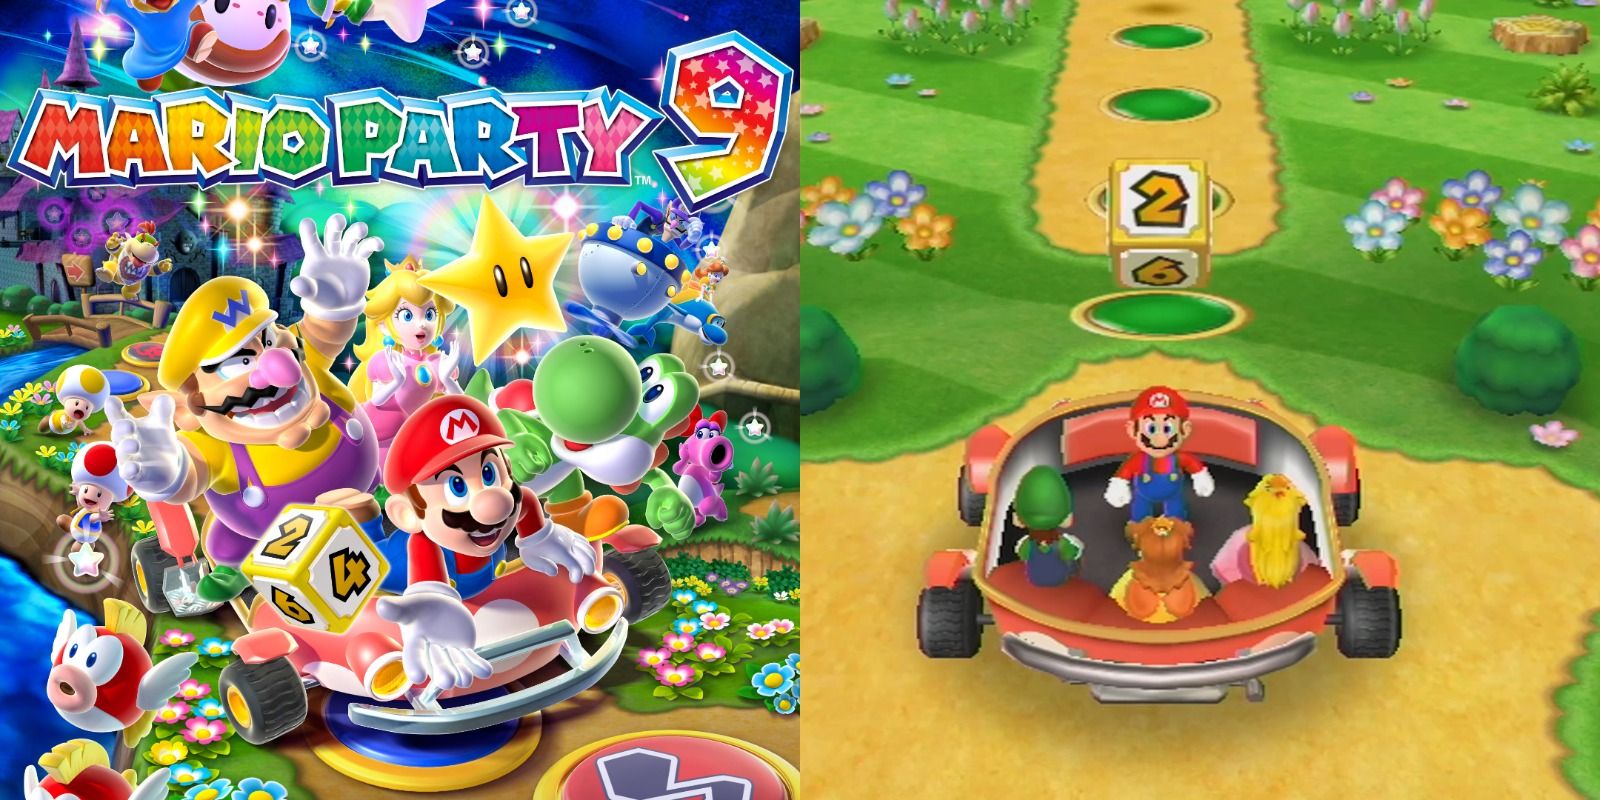 Mario Party 9 for the Nintendo Wii